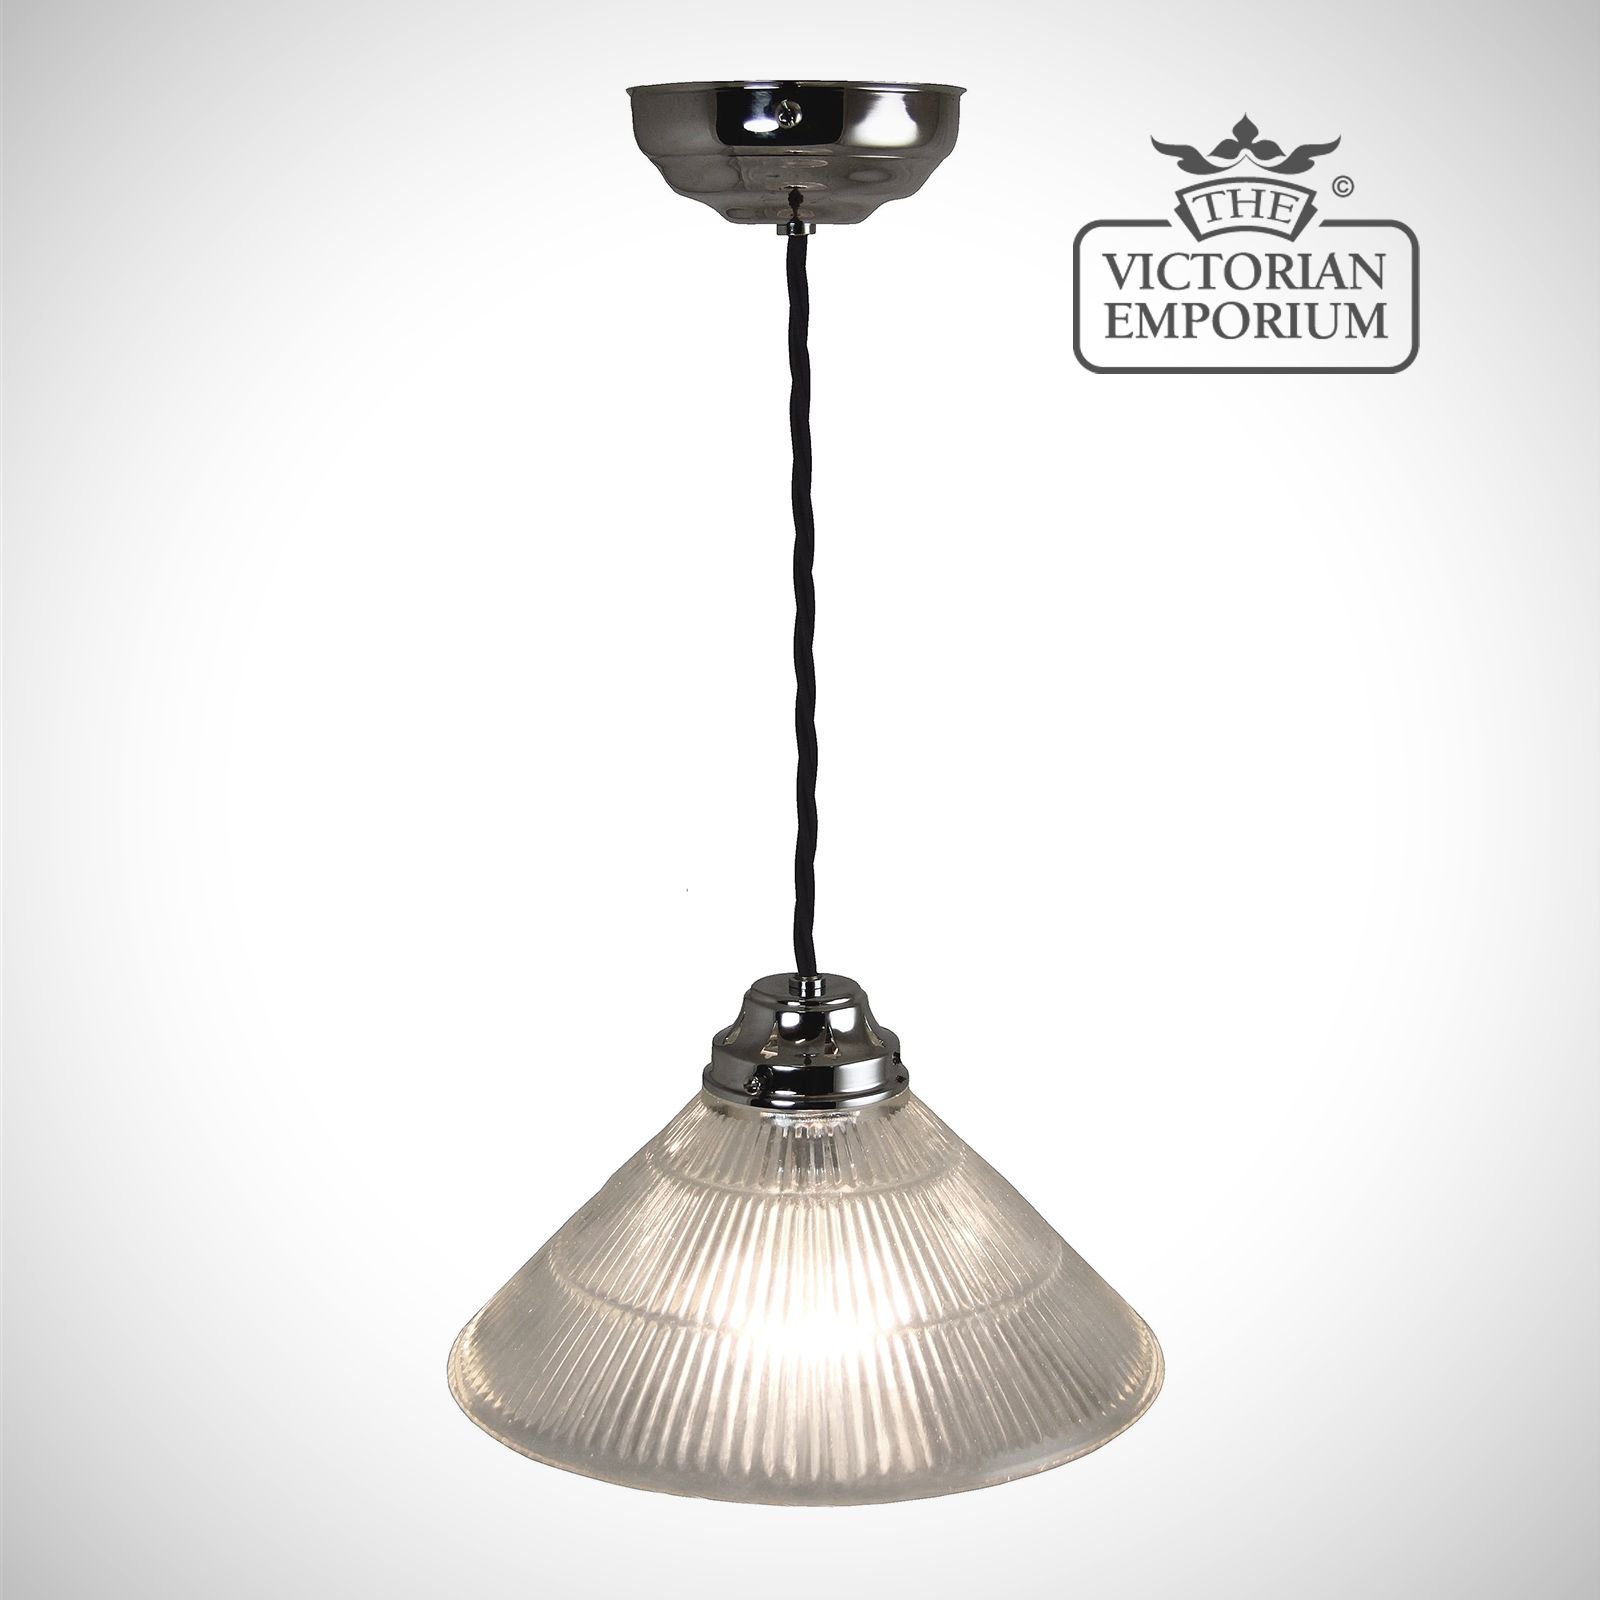 Reeded glass cone shaped ceiling light in chrome